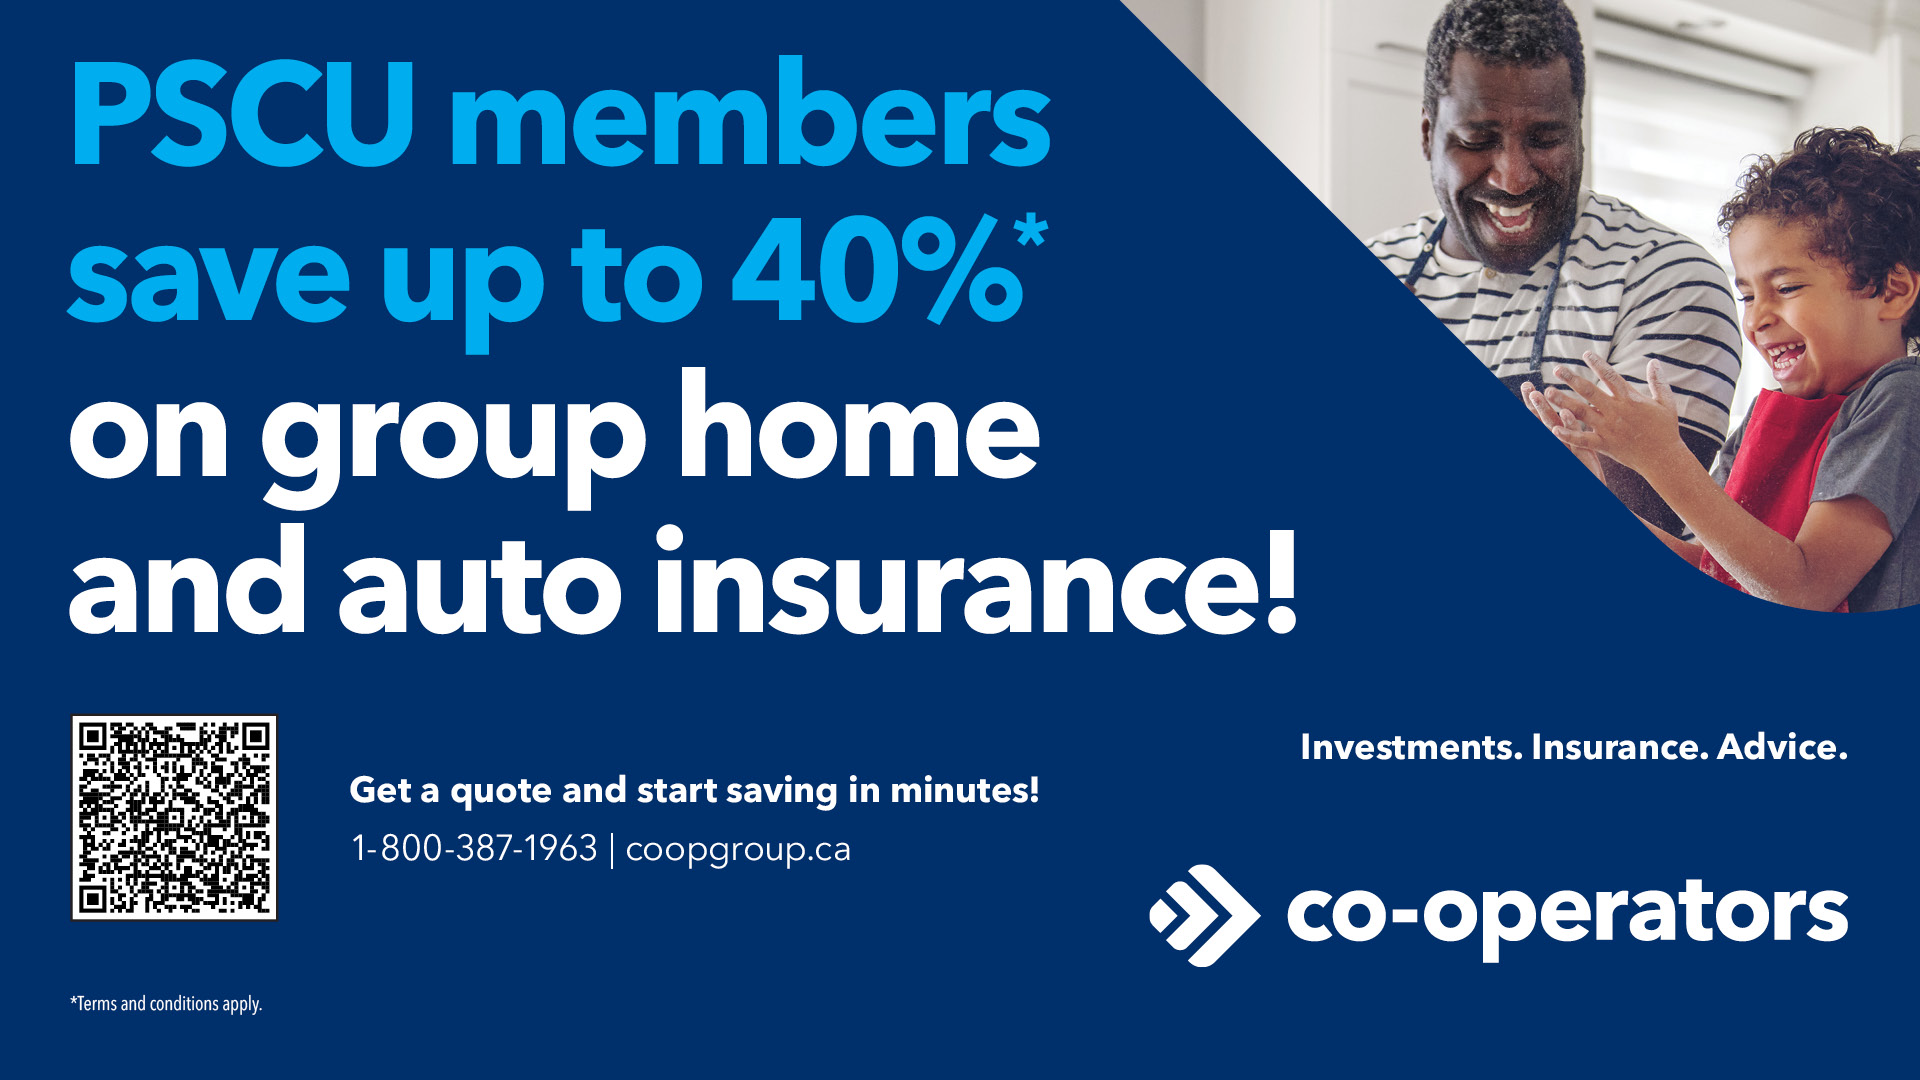 PSCU members save up to 40%* on group home and auto insurance. Get a quote and start saving in minutes! 1-800-387-1963. coopgroup.ca co-operators *Terms and conditions apply